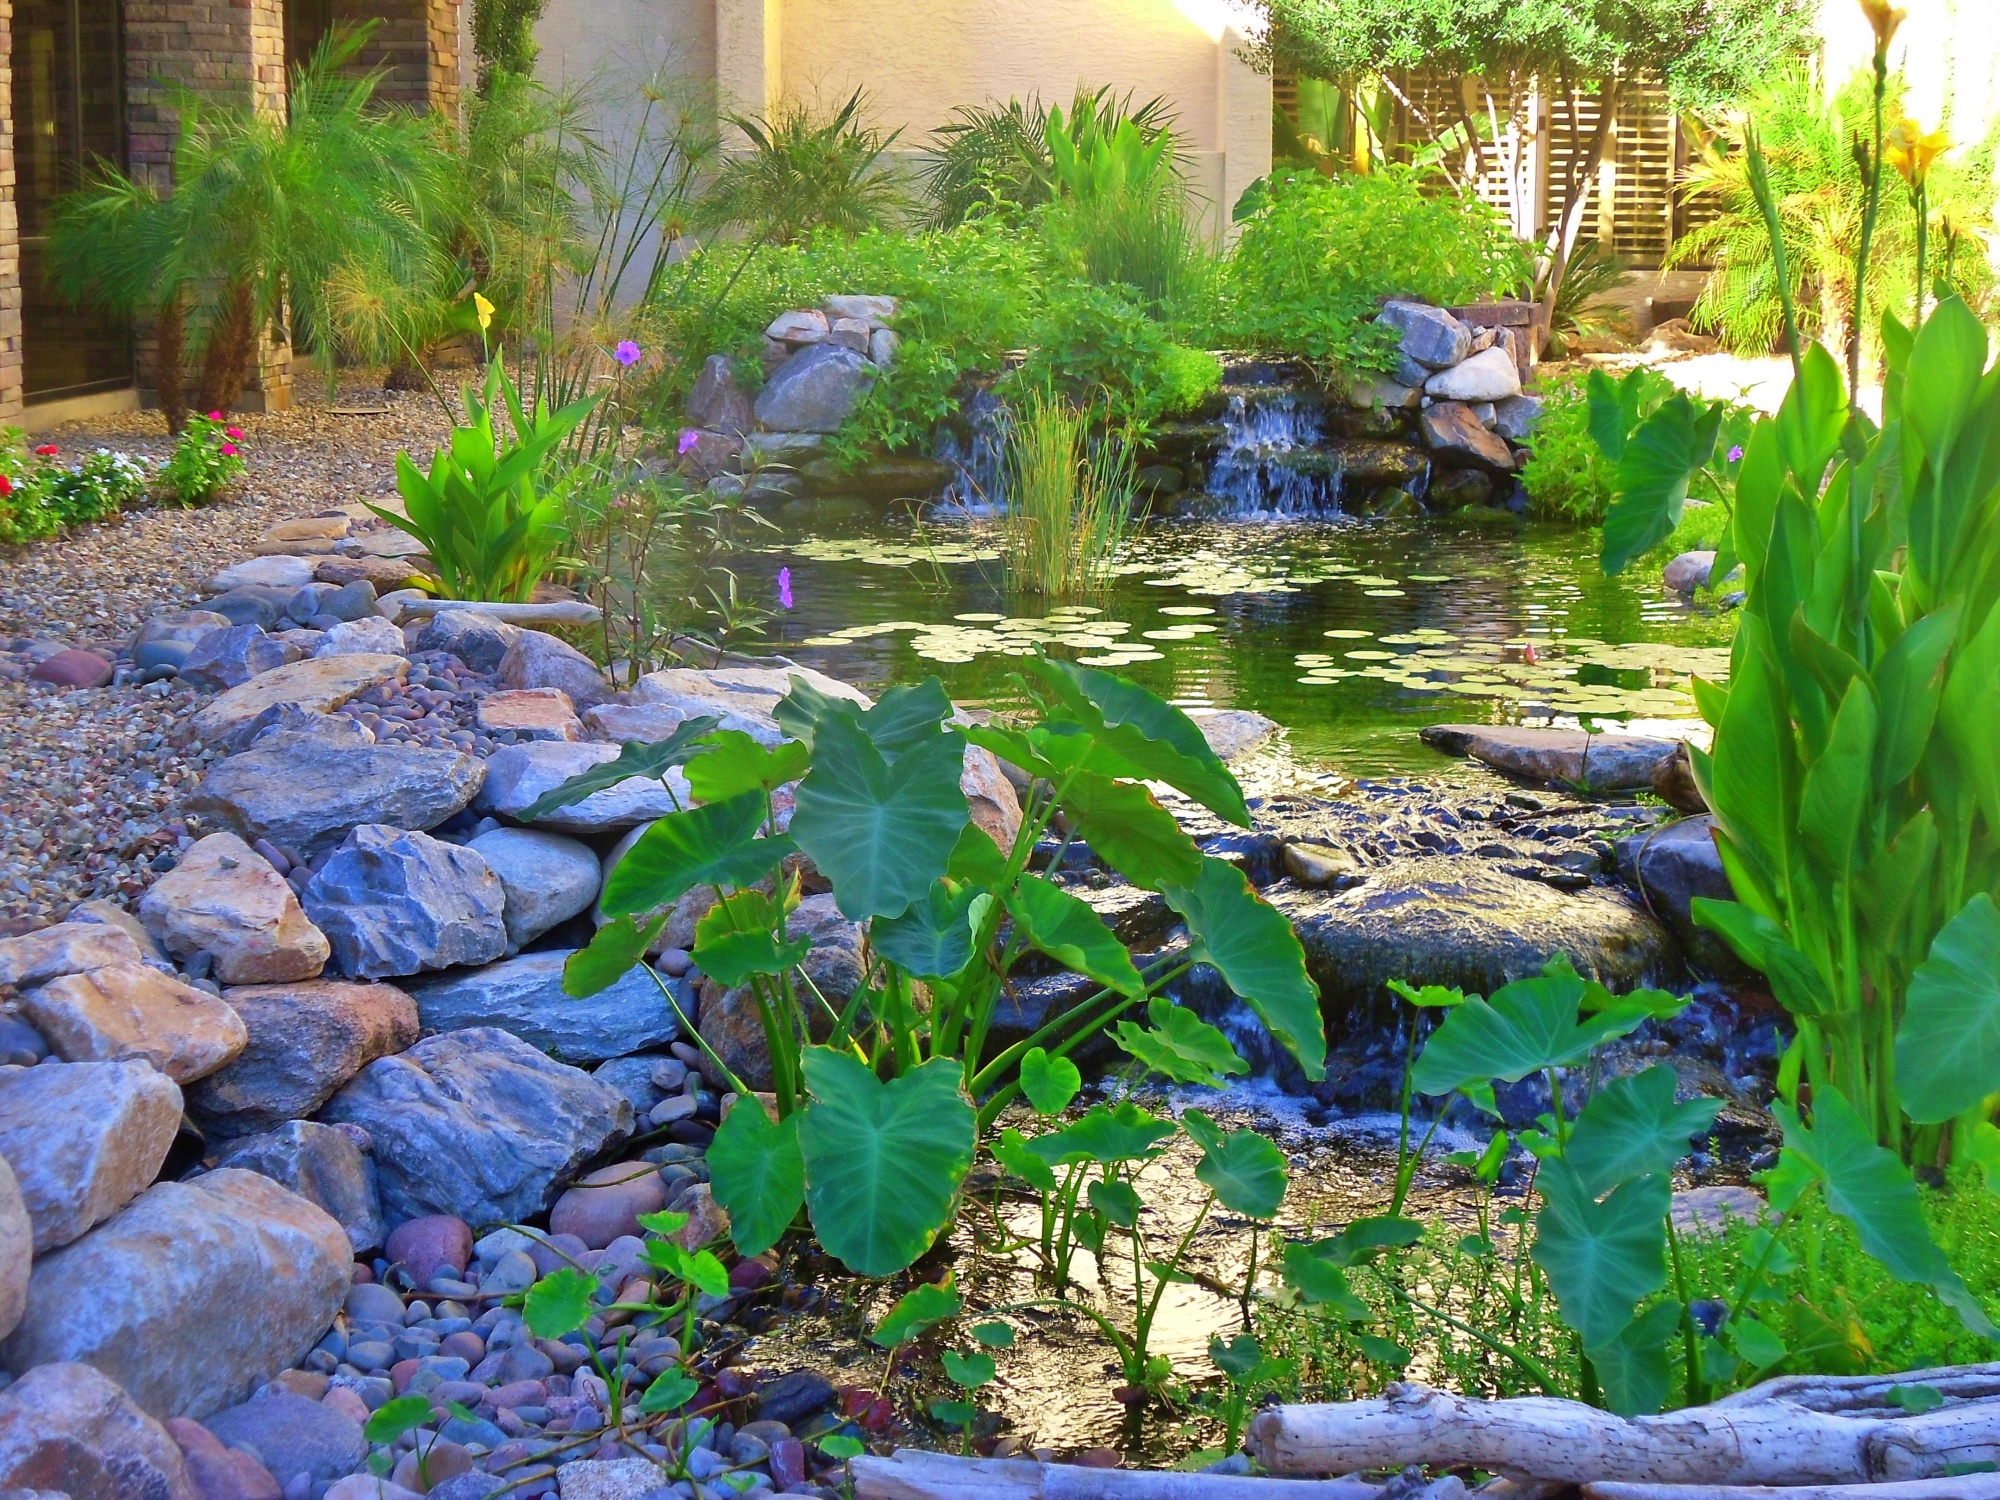 The pond and aquatic plants at Westminster Village